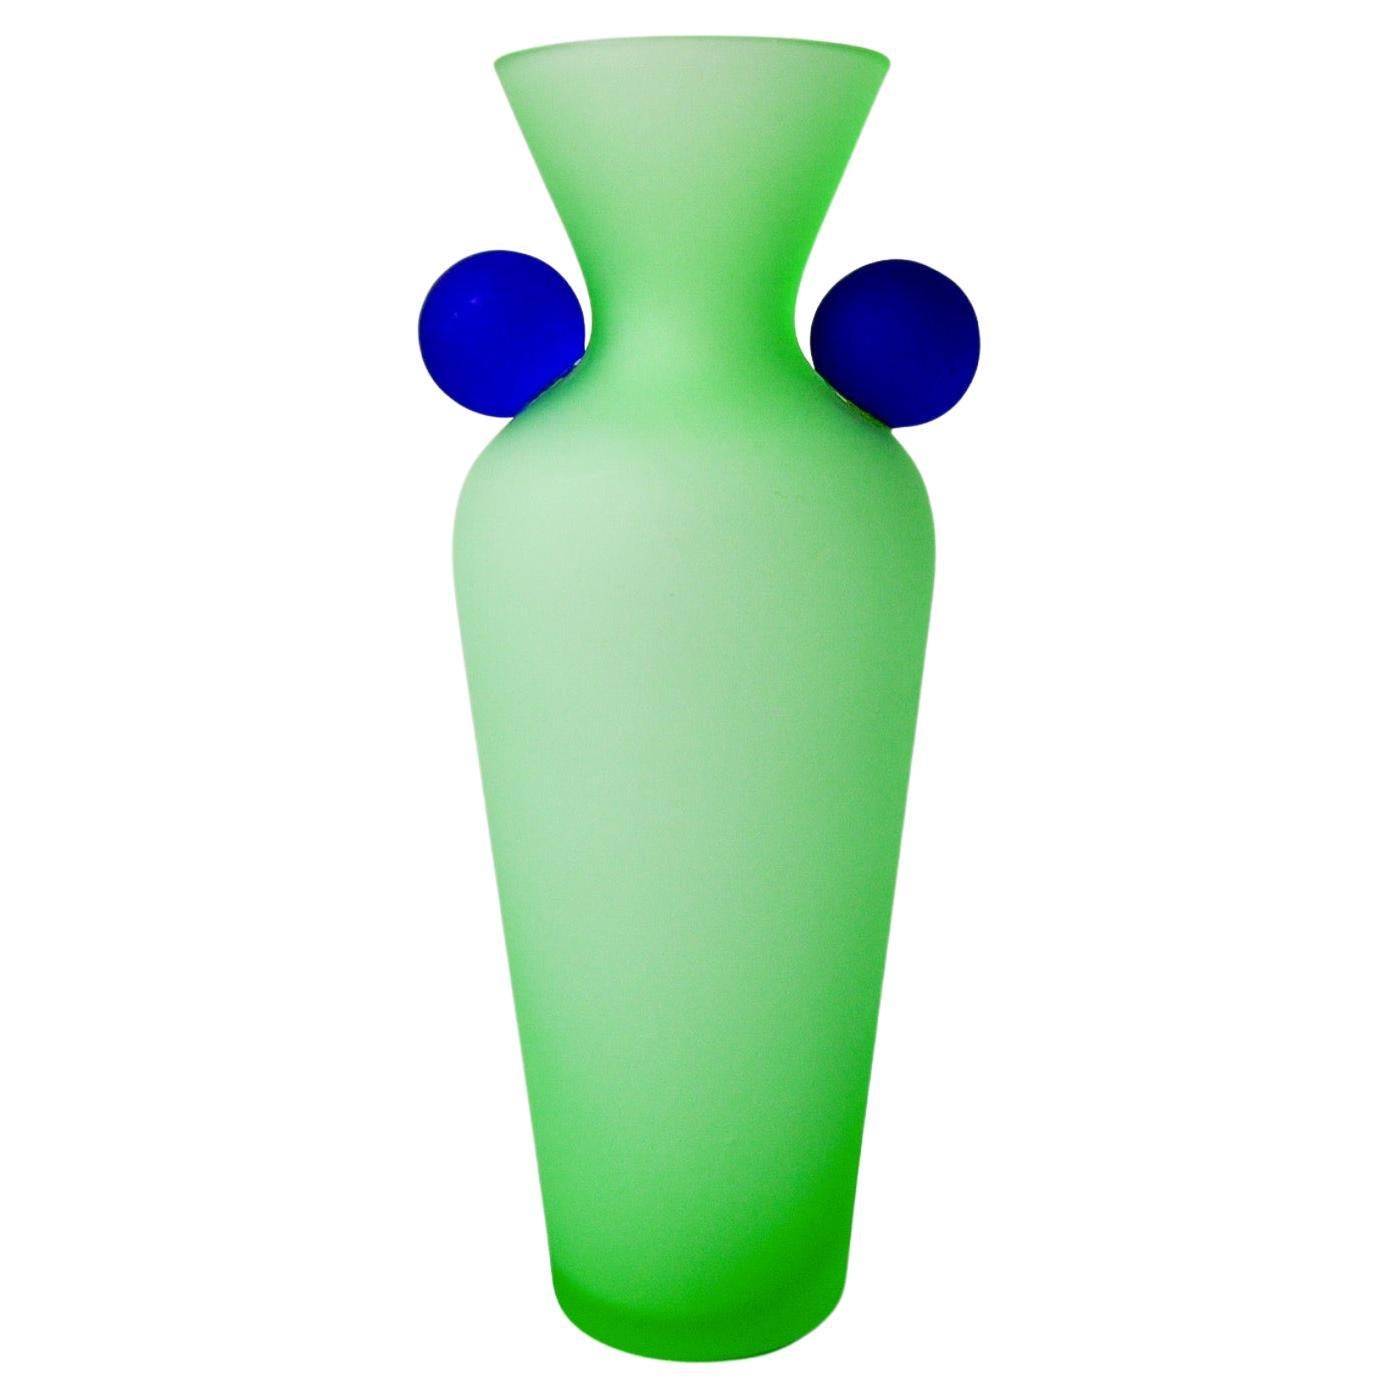 Green and blue satin murano glass vase, menphis style, italy, 1980 For Sale